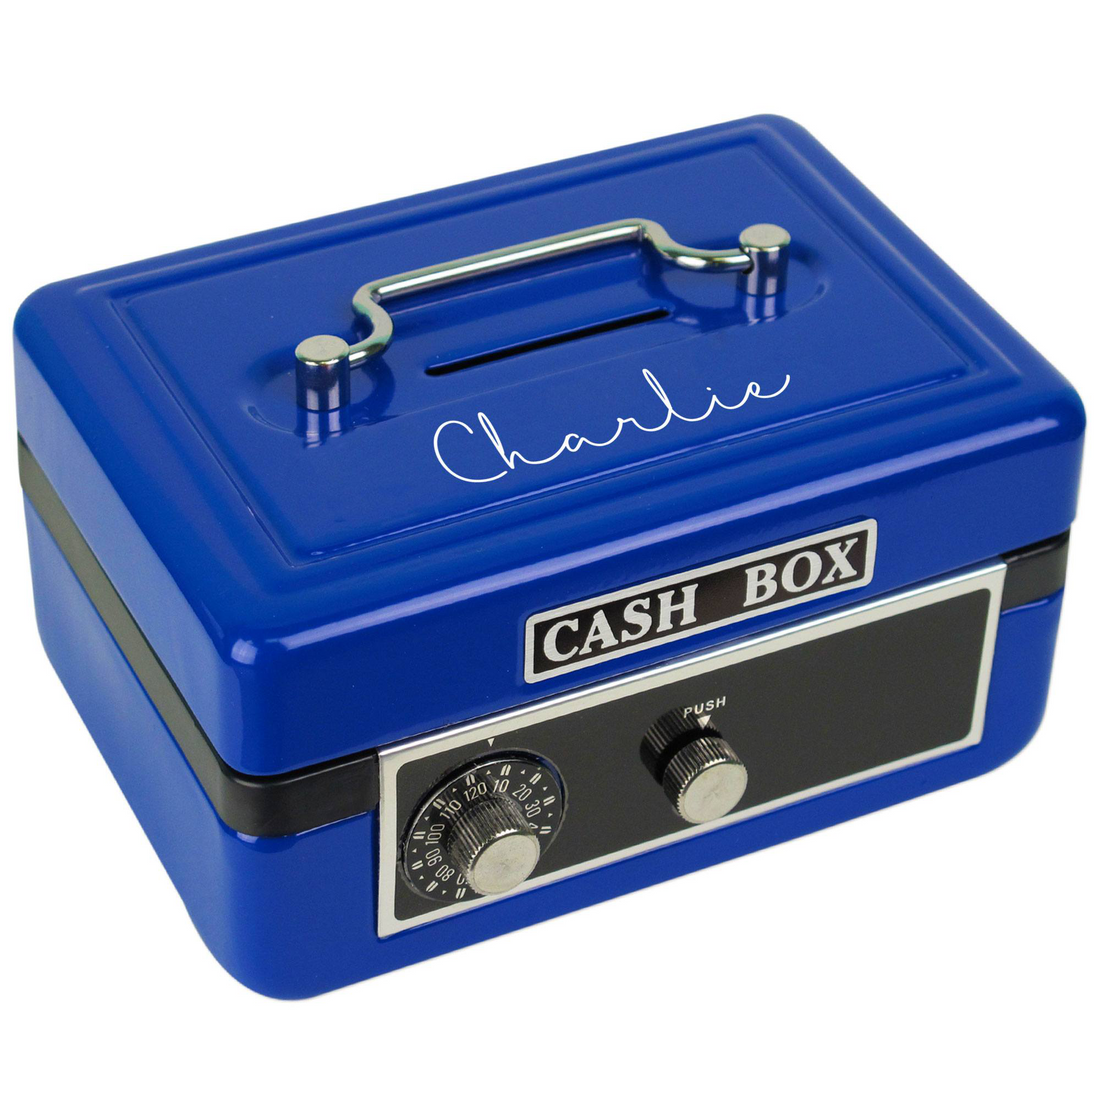 Monogrammed Cash Box - Name and Optional Message